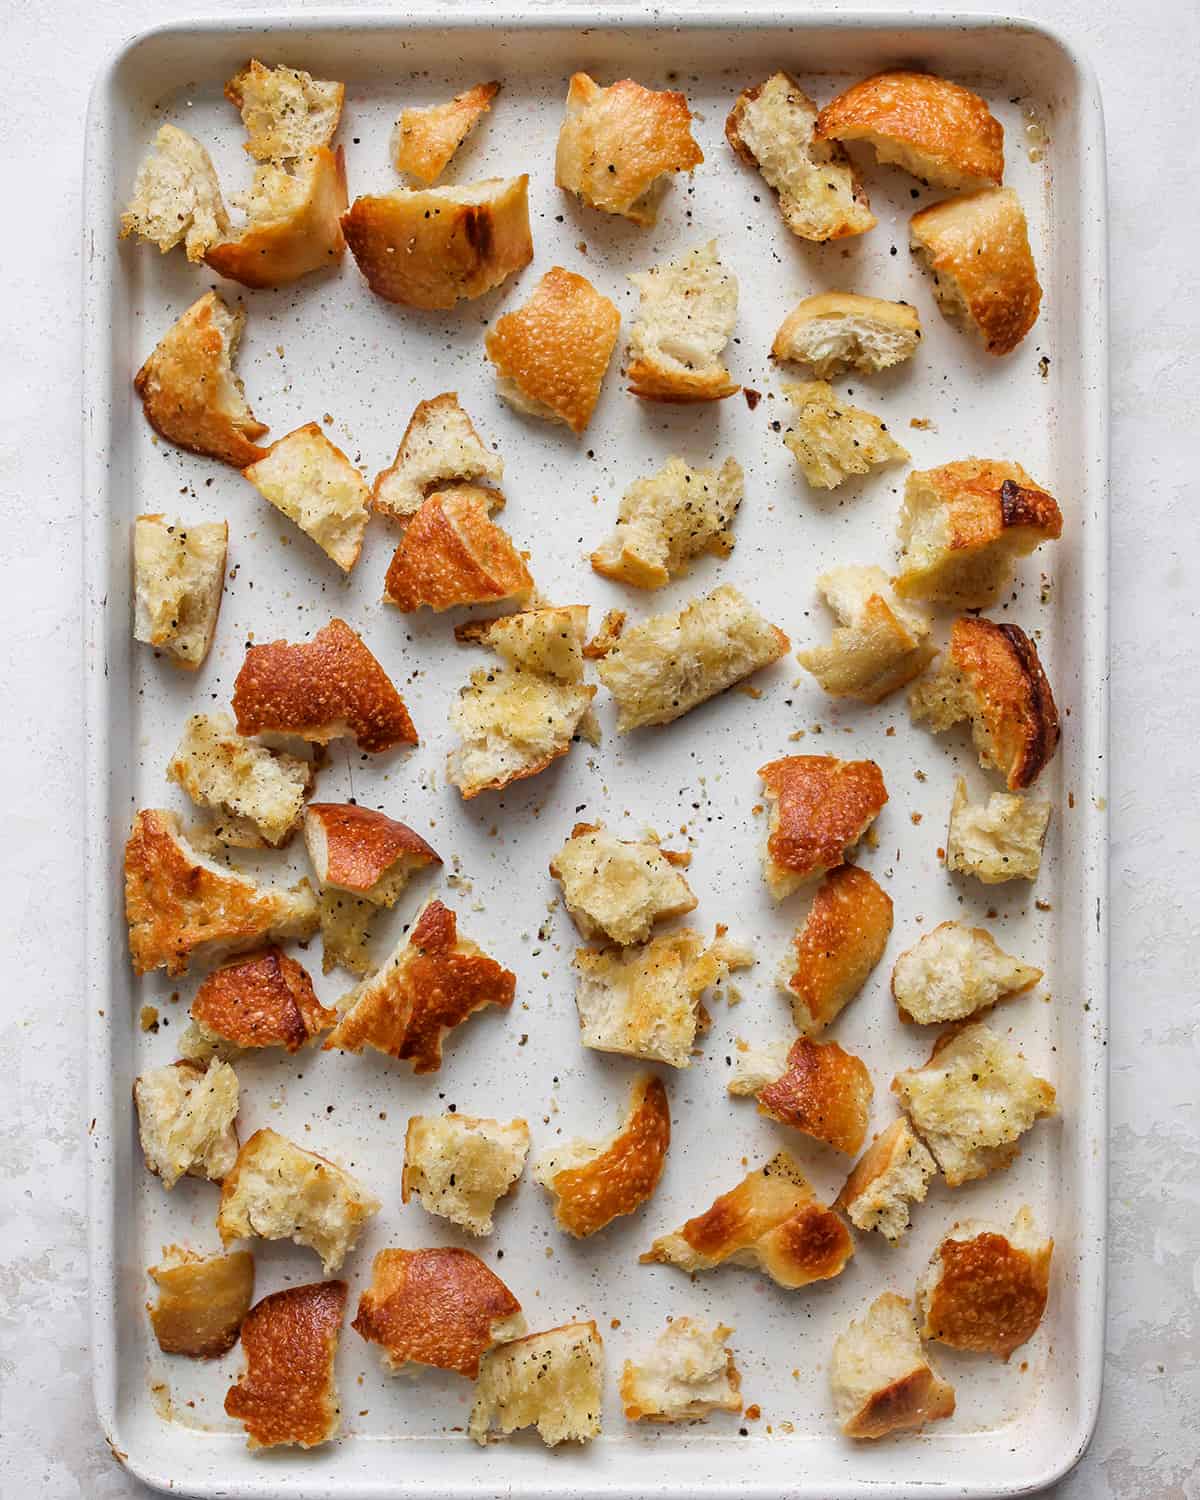 bread on a baking sheet after toasting to use in this panzanella salad recipe